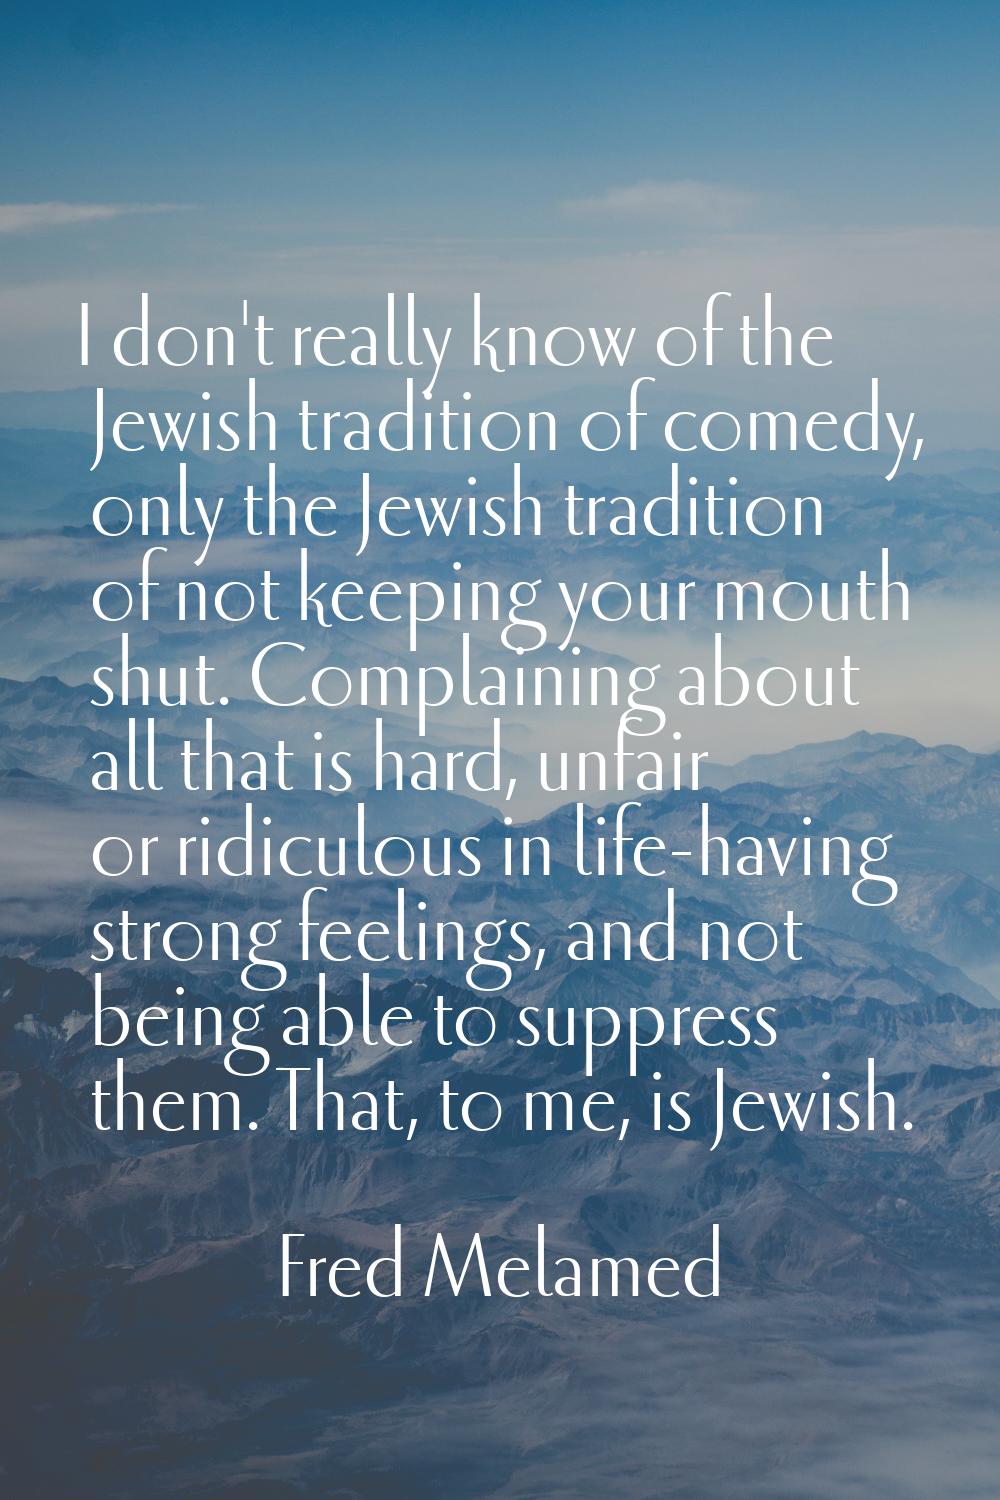 I don't really know of the Jewish tradition of comedy, only the Jewish tradition of not keeping you